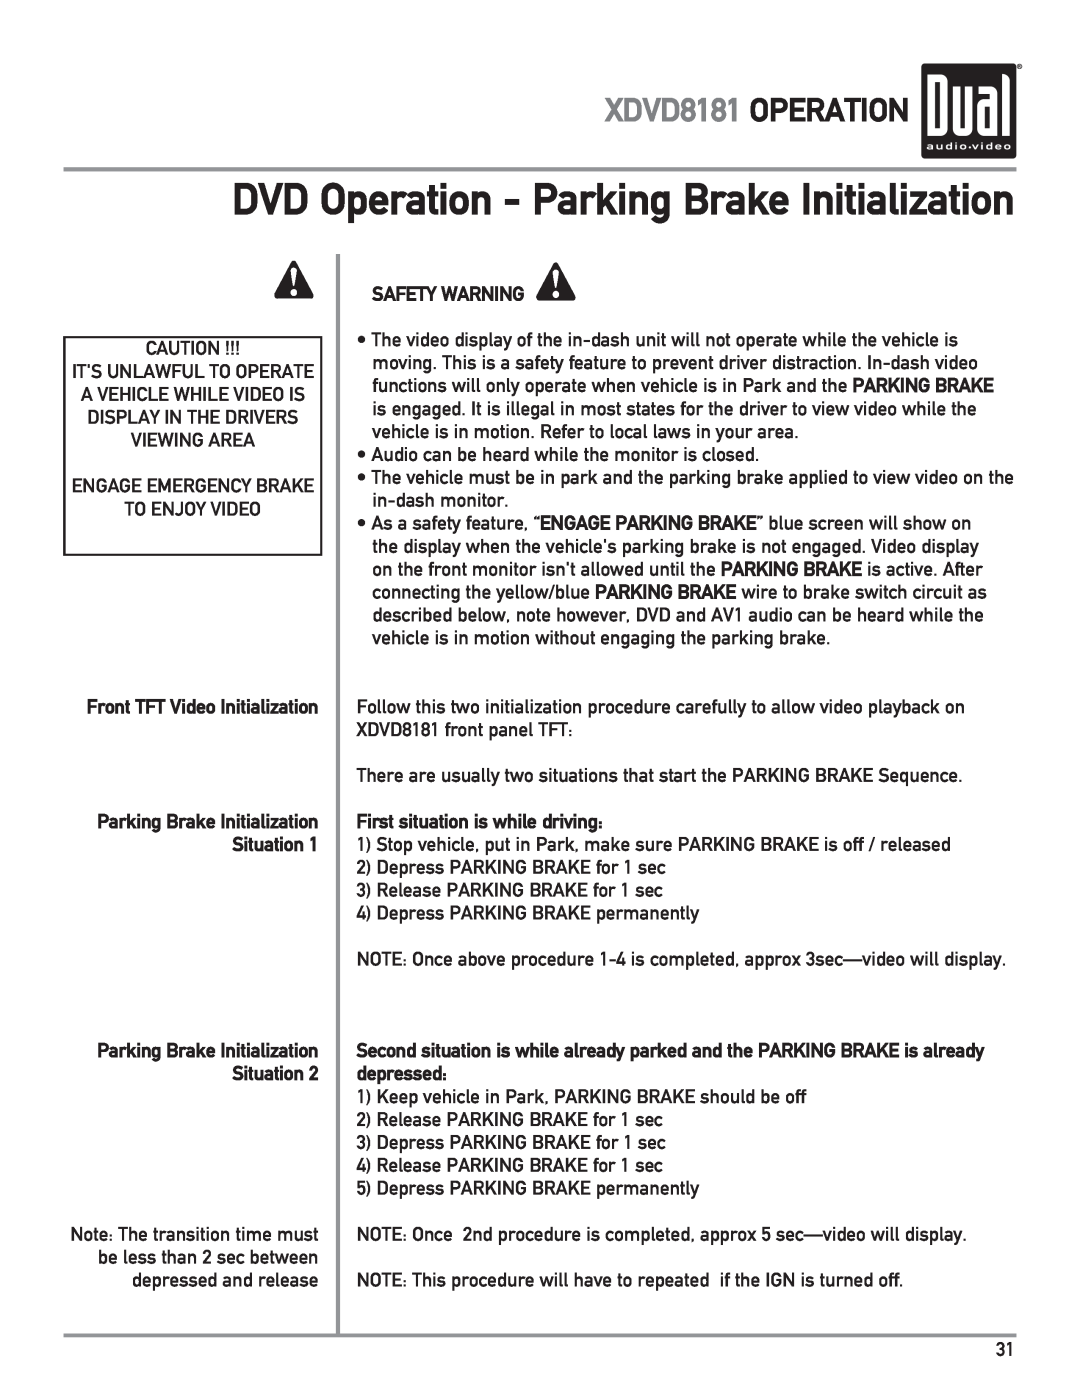 Dual DVD Operation - Parking Brake Initialization, XDVD8181 OPERATION, Safety Warning, First situation is while driving 